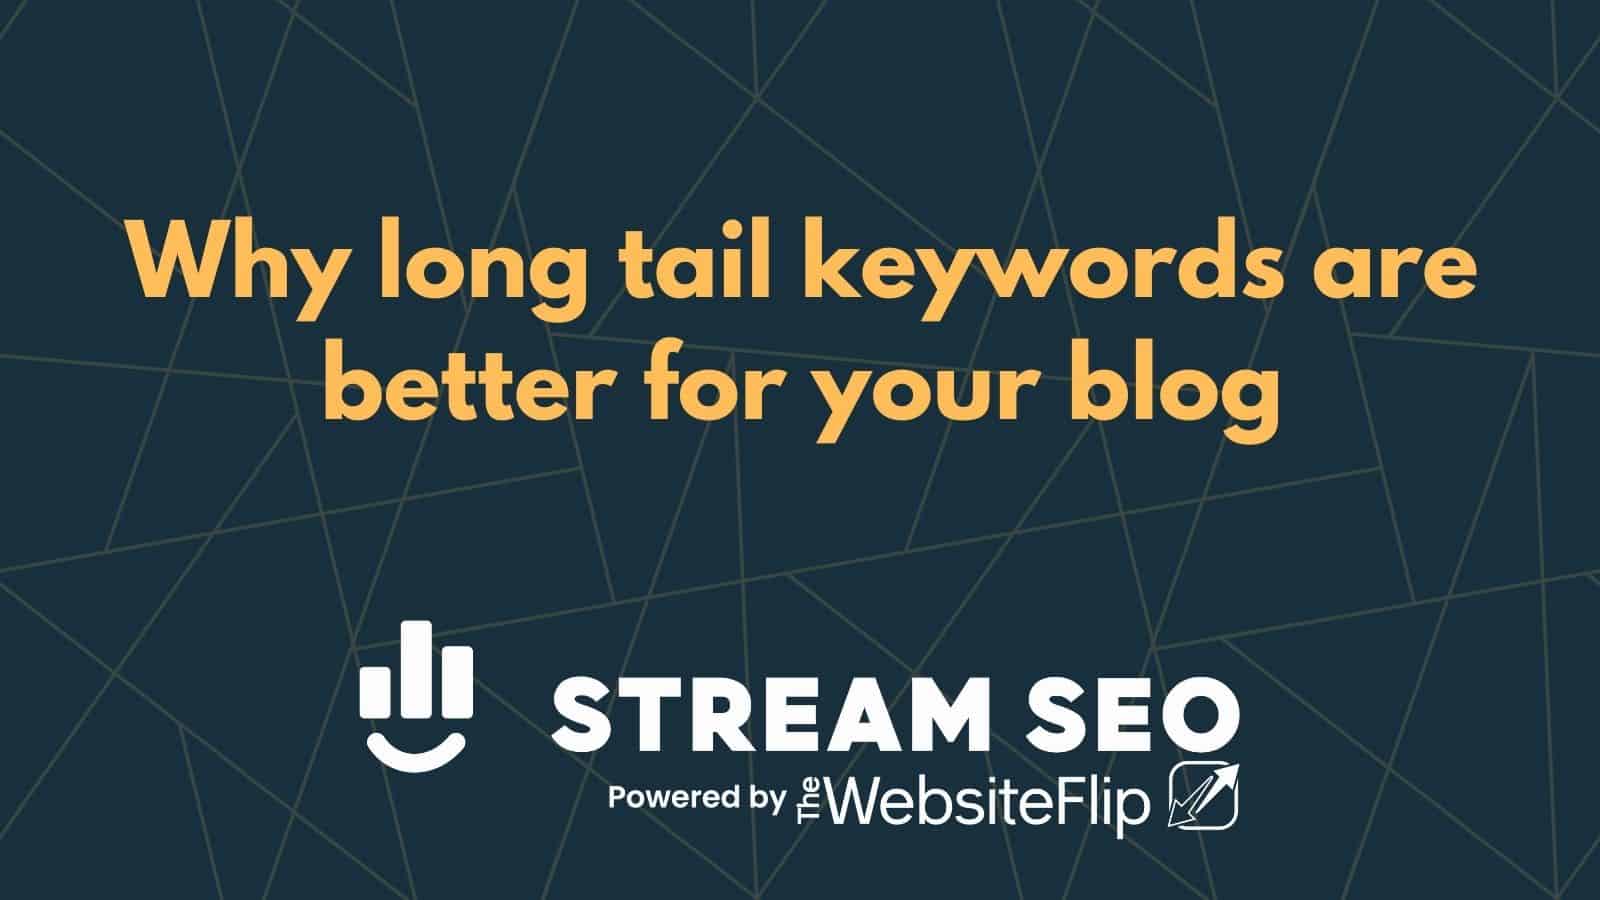 Why long tail keywords are better for your blog